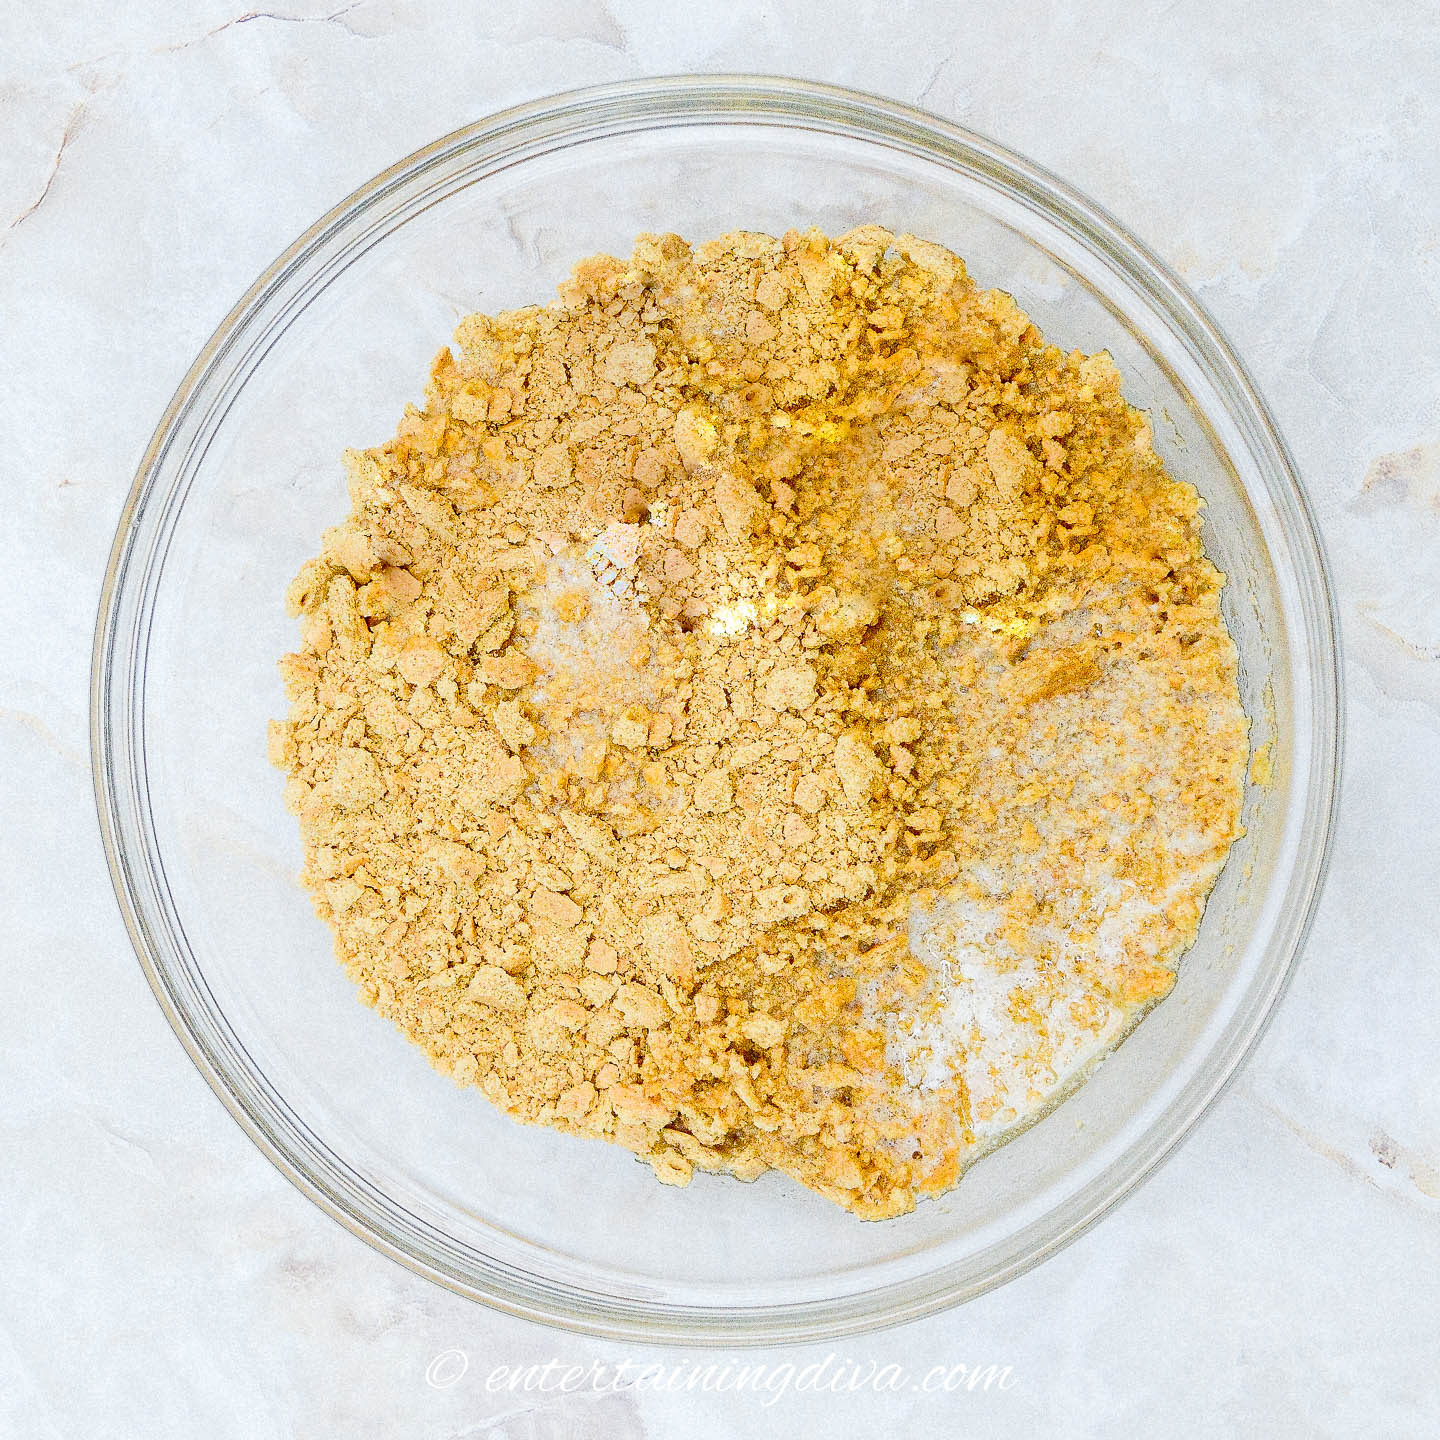 graham cracker crumbs and melted butter in a glass bowl